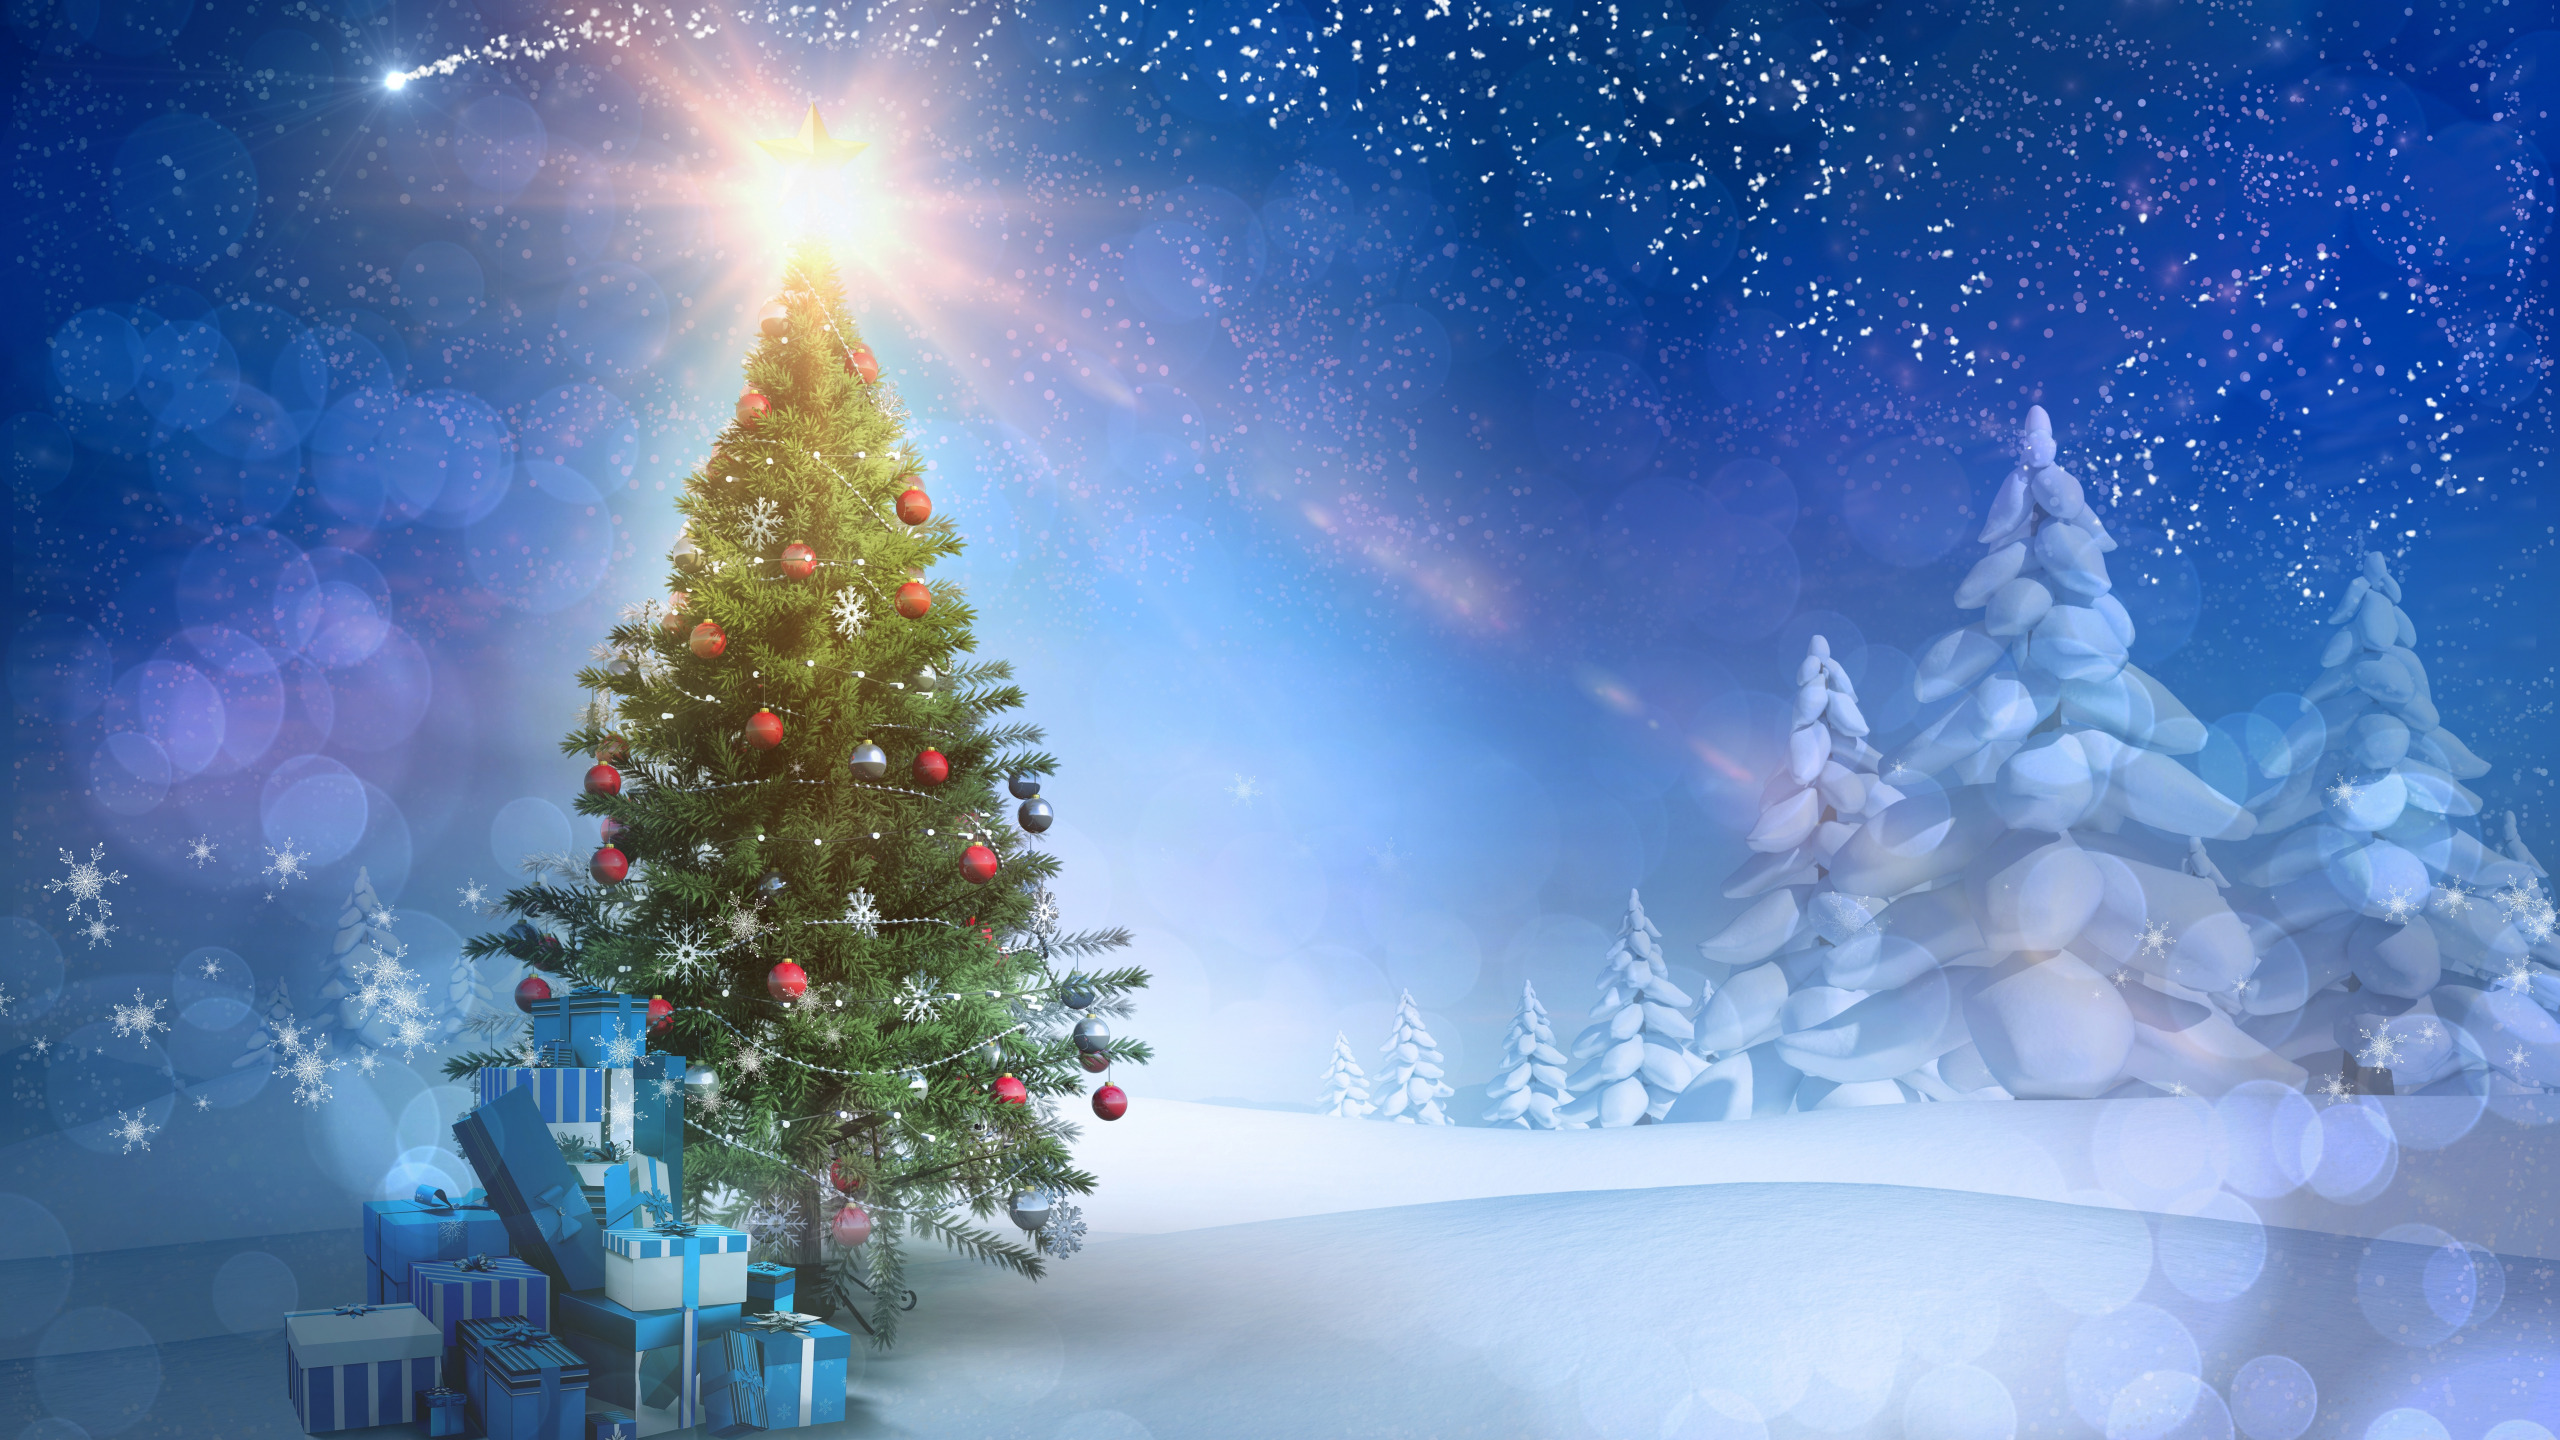 Download wallpaper winter, snow, night, nature, the city, lights, new year, Christmas, section new year / christmas in resolution 2560x1440